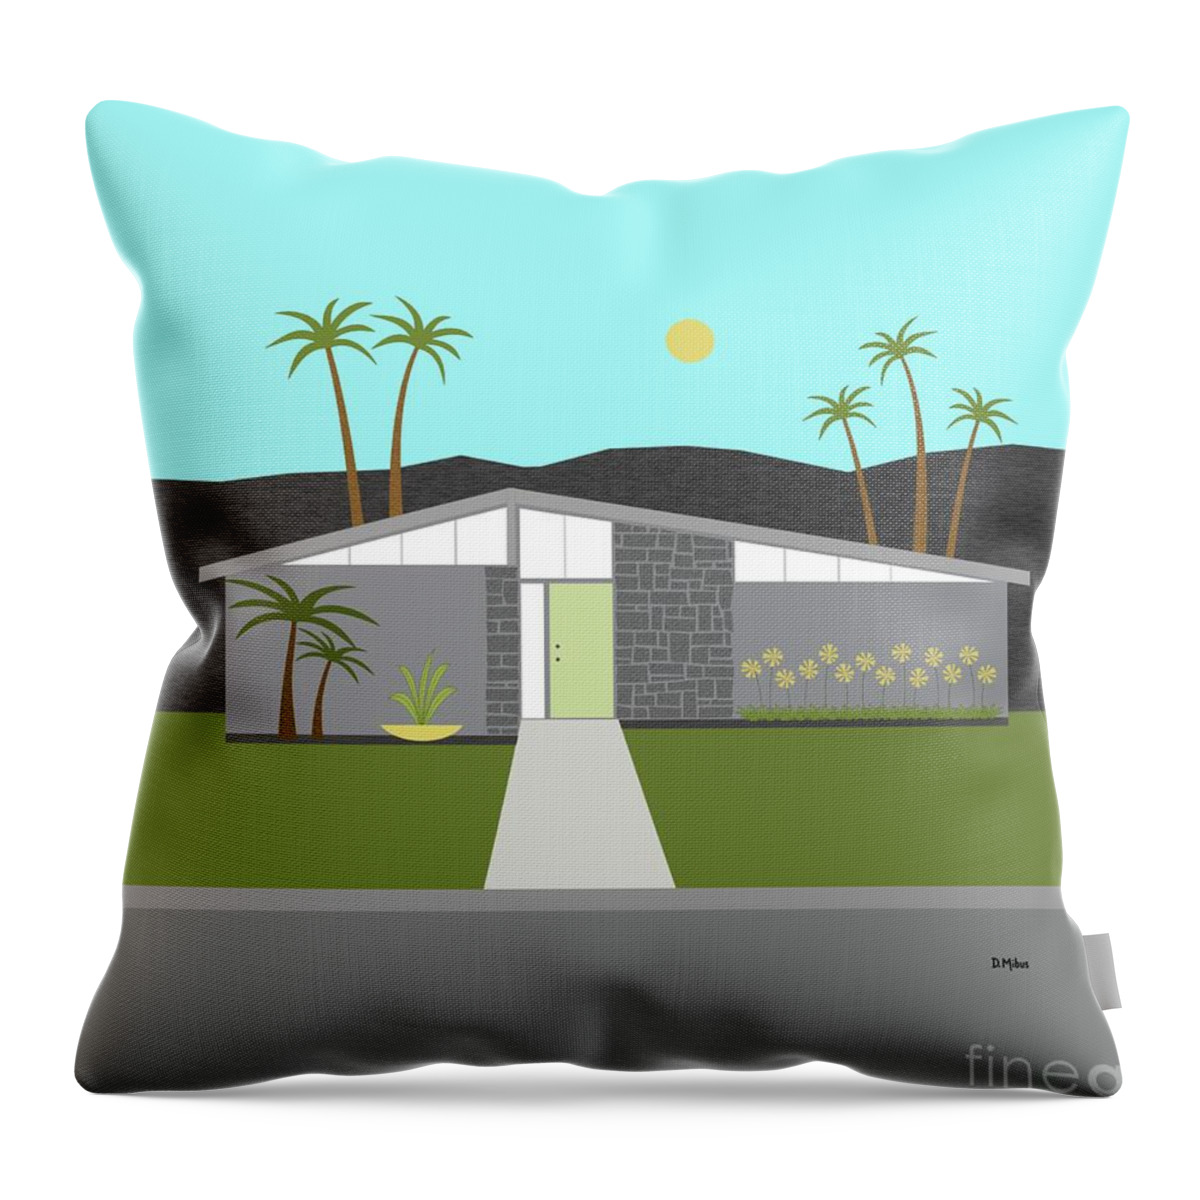  Throw Pillow featuring the digital art Custom for Lisa by Donna Mibus